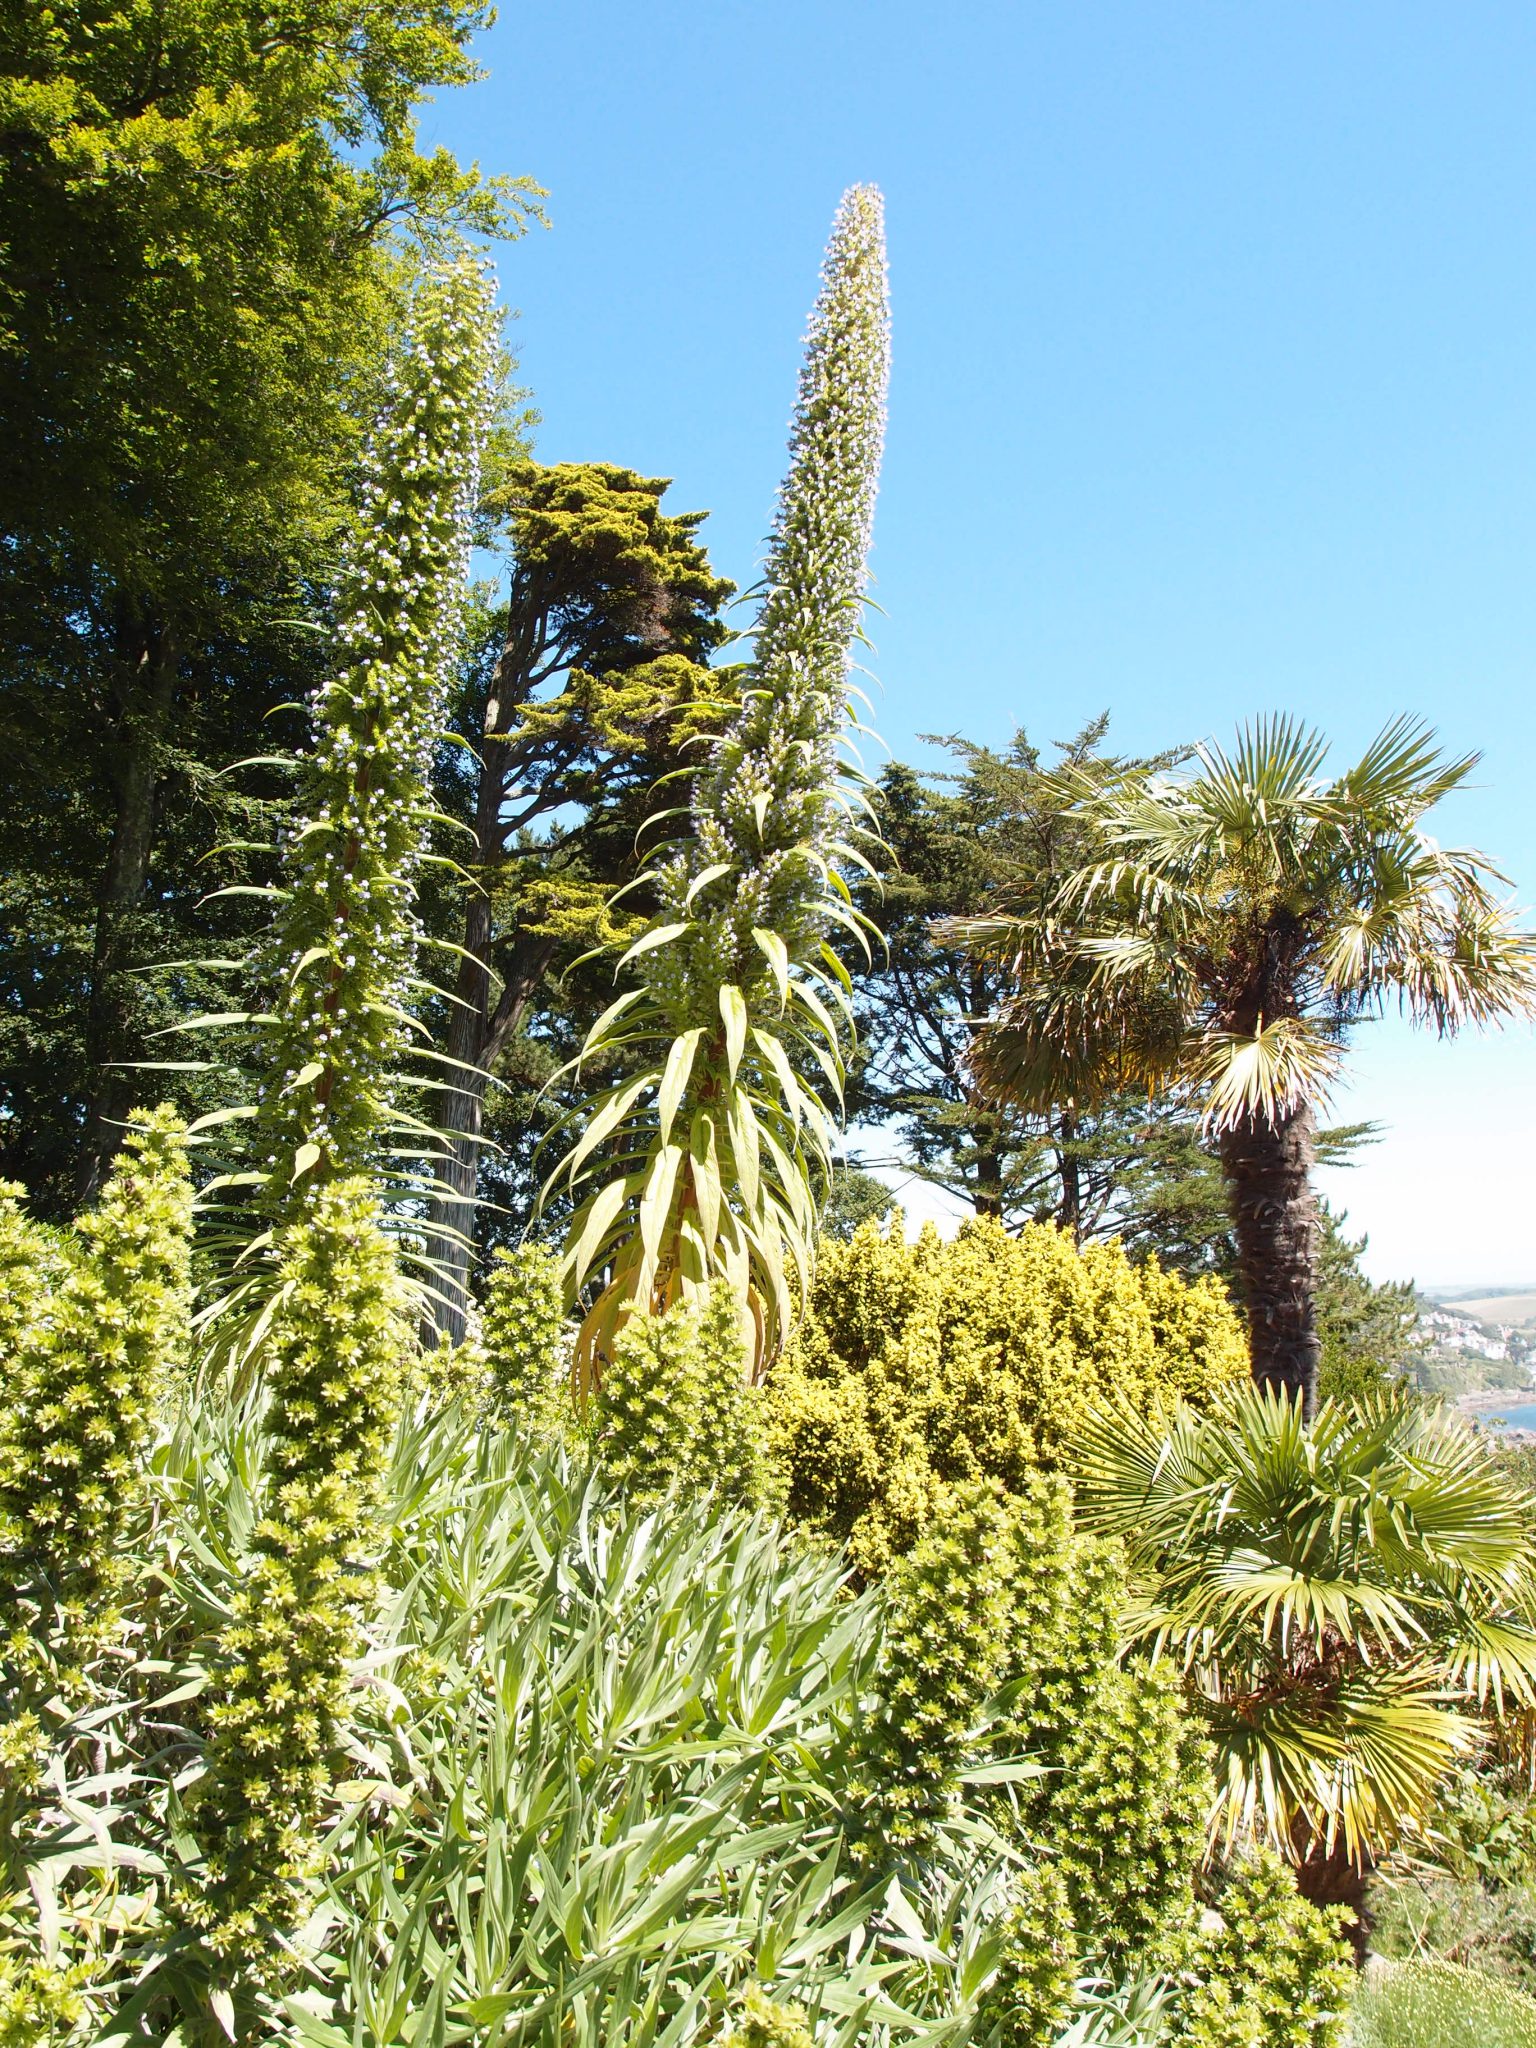 In the Palm Gardens: Tree Echium (also called Tower of Jewels or Echium pininana)